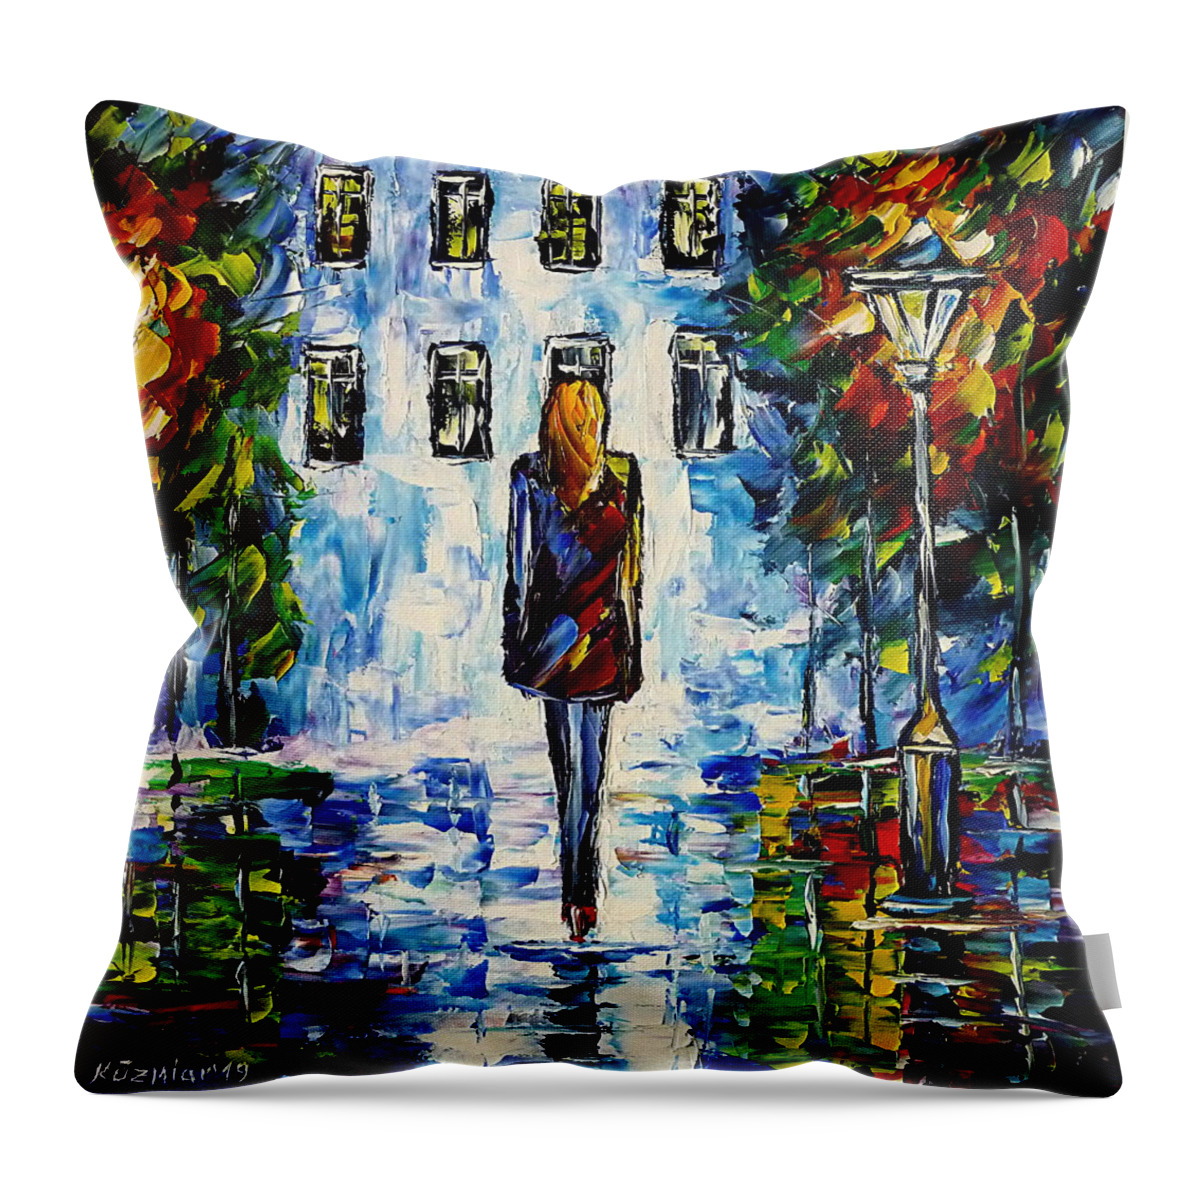 Nightly Scenery Throw Pillow featuring the painting On The Way Home by Mirek Kuzniar